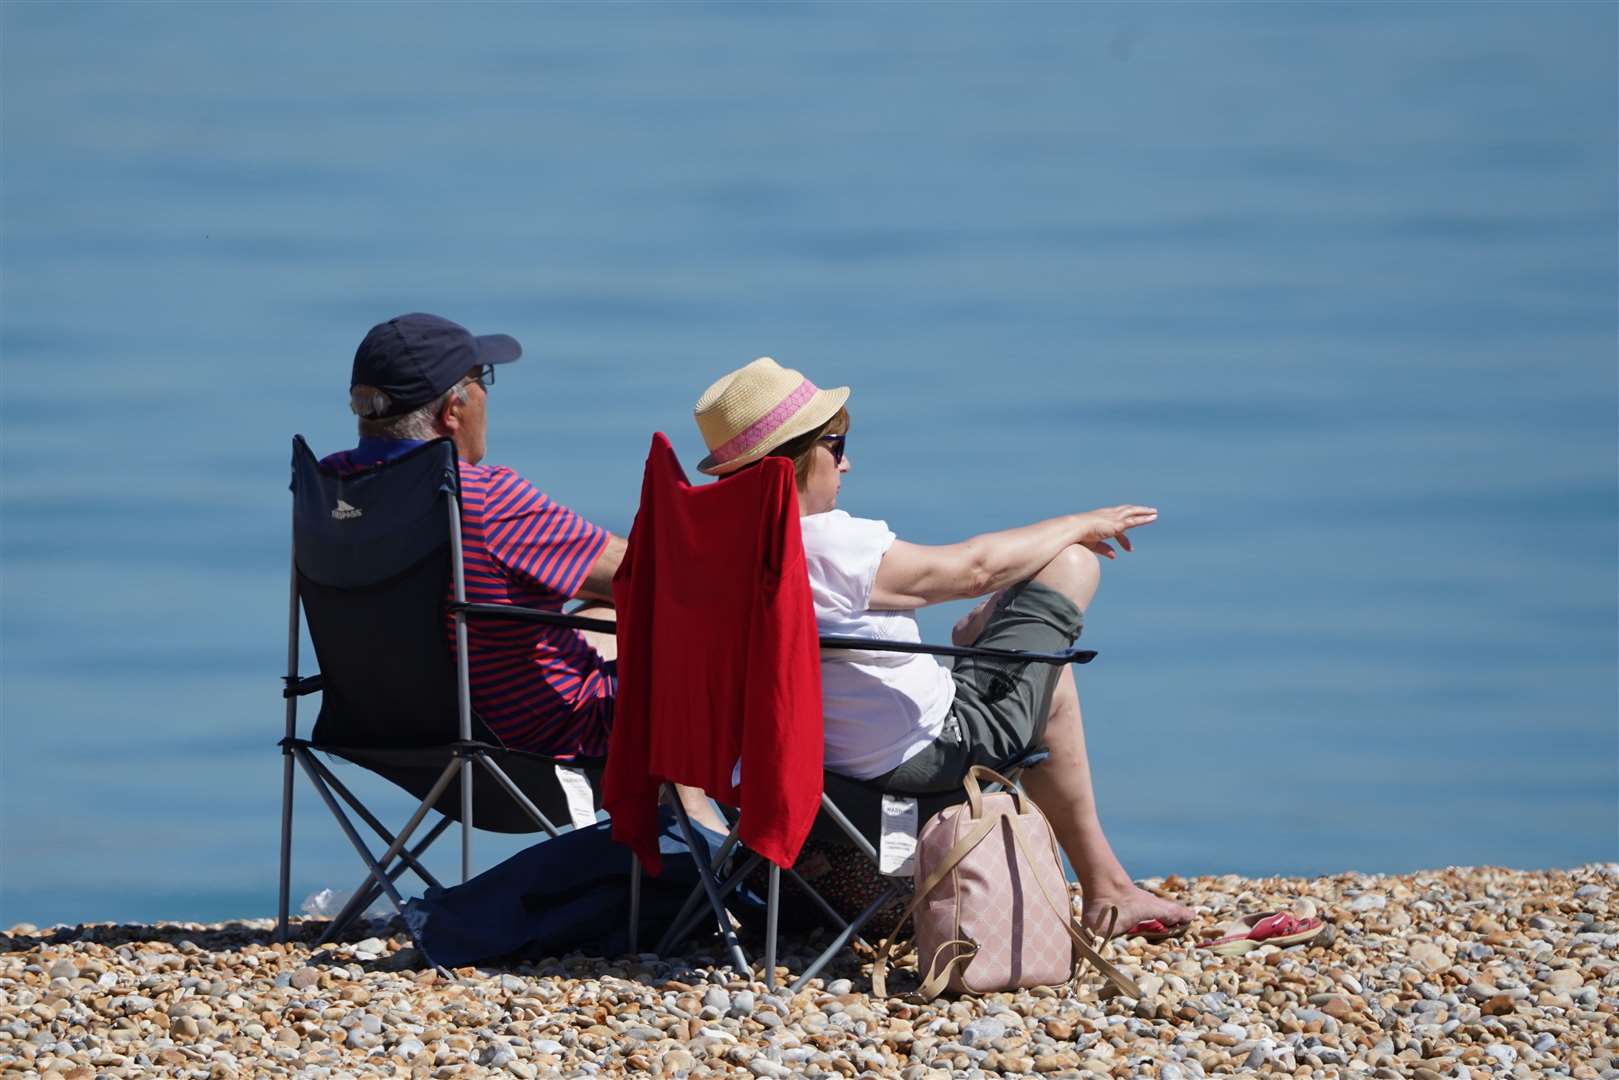 Temperatures are expected to rise to 34C in some parts of the UK later this week (Gareth Fuller/PA)